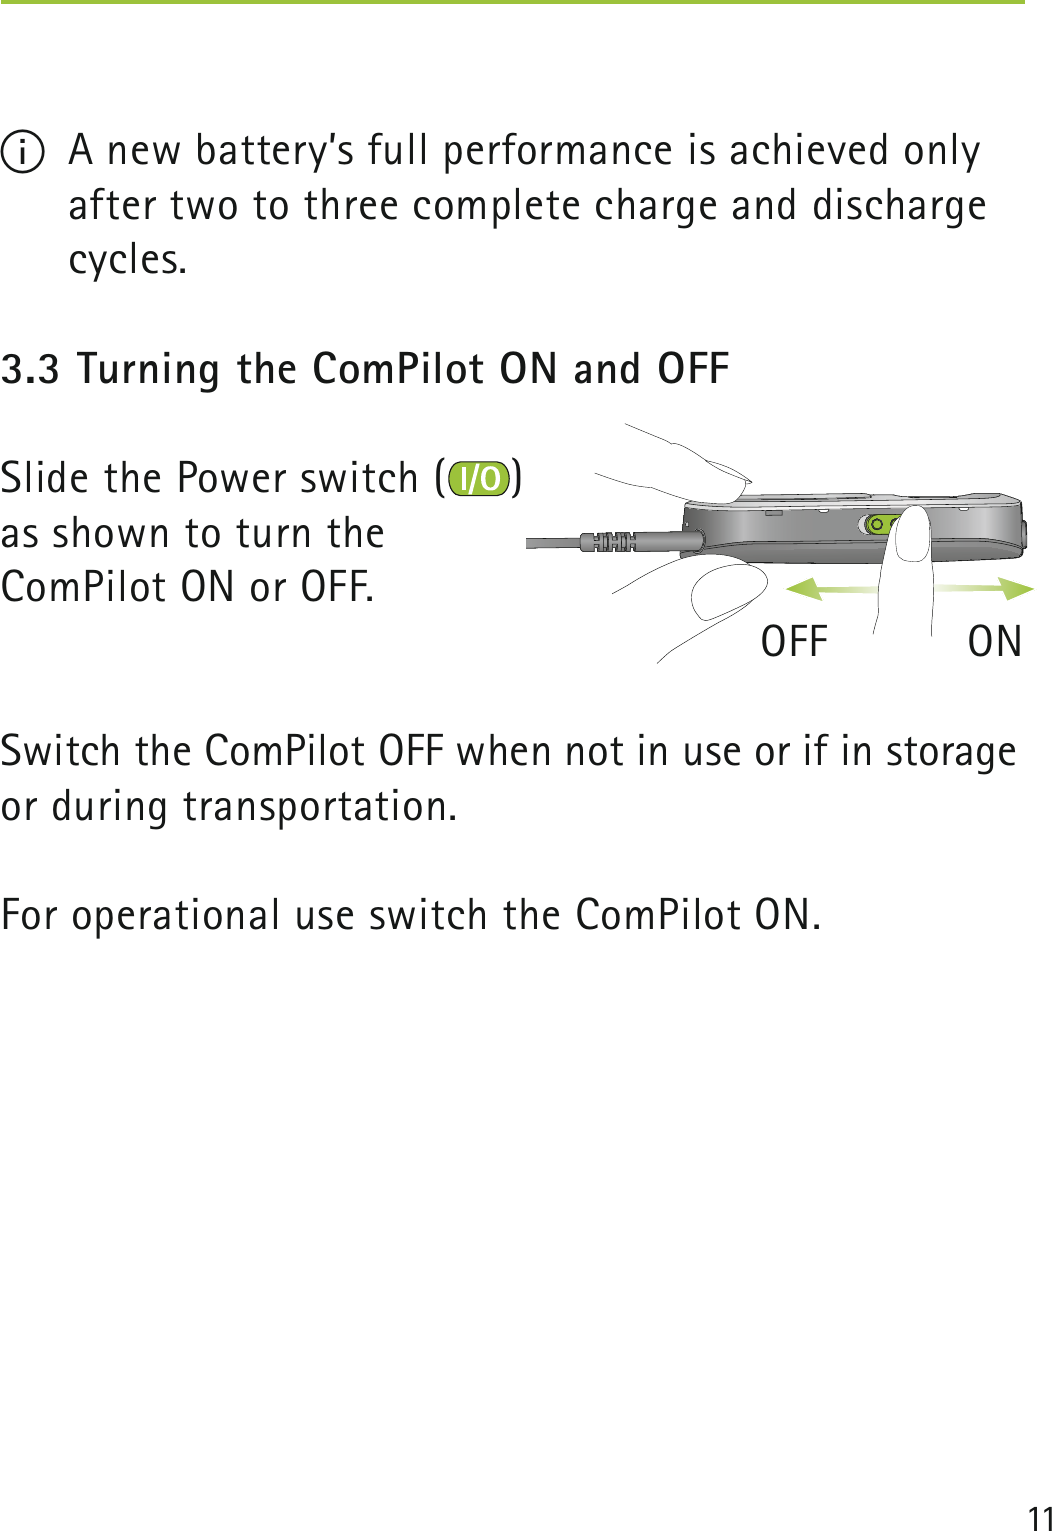 11 I  A new battery’s full performance is achieved only after two to three complete charge and discharge cycles.3.3 Turning the ComPilot ON and OFFSlide the Power switch ( ) as shown to turn the ComPilot ON or OFF.                   OFF           ONSwitch the ComPilot OFF when not in use or if in storage or during transportation.For operational use switch the ComPilot ON. 